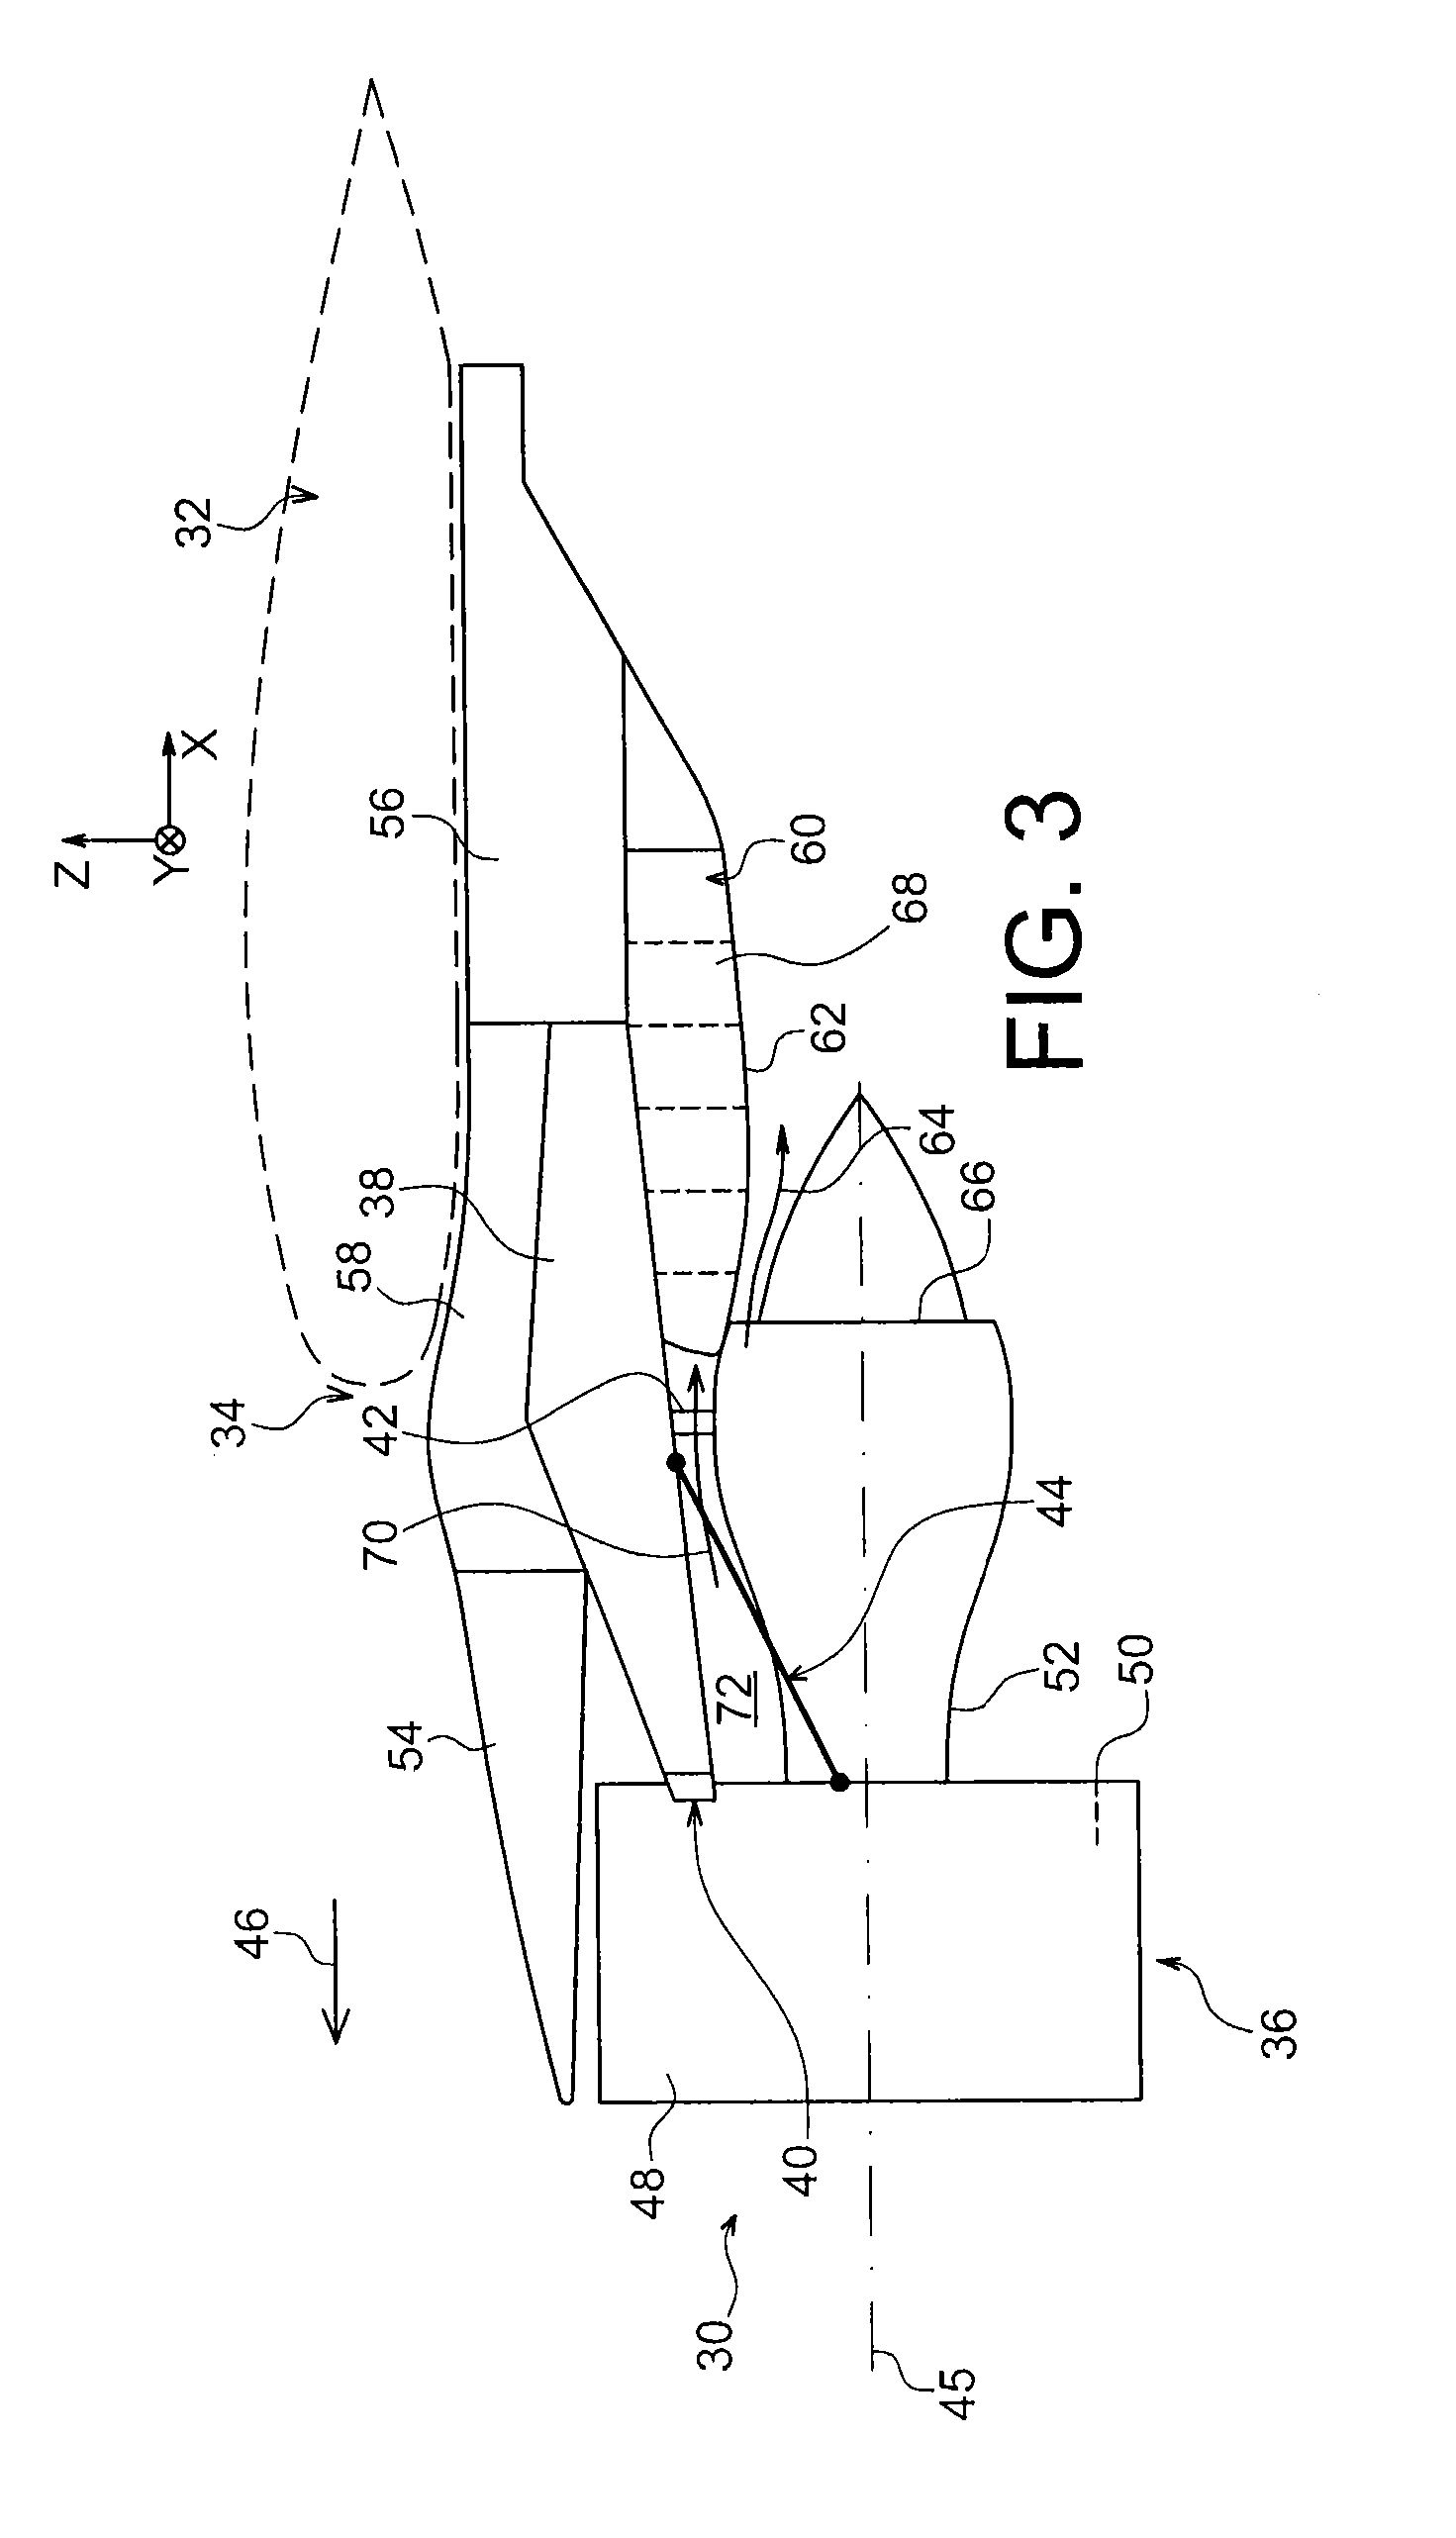 Device for attaching an aircraft engine, comprising blocks for clamping an engine attachment with a wedge effect